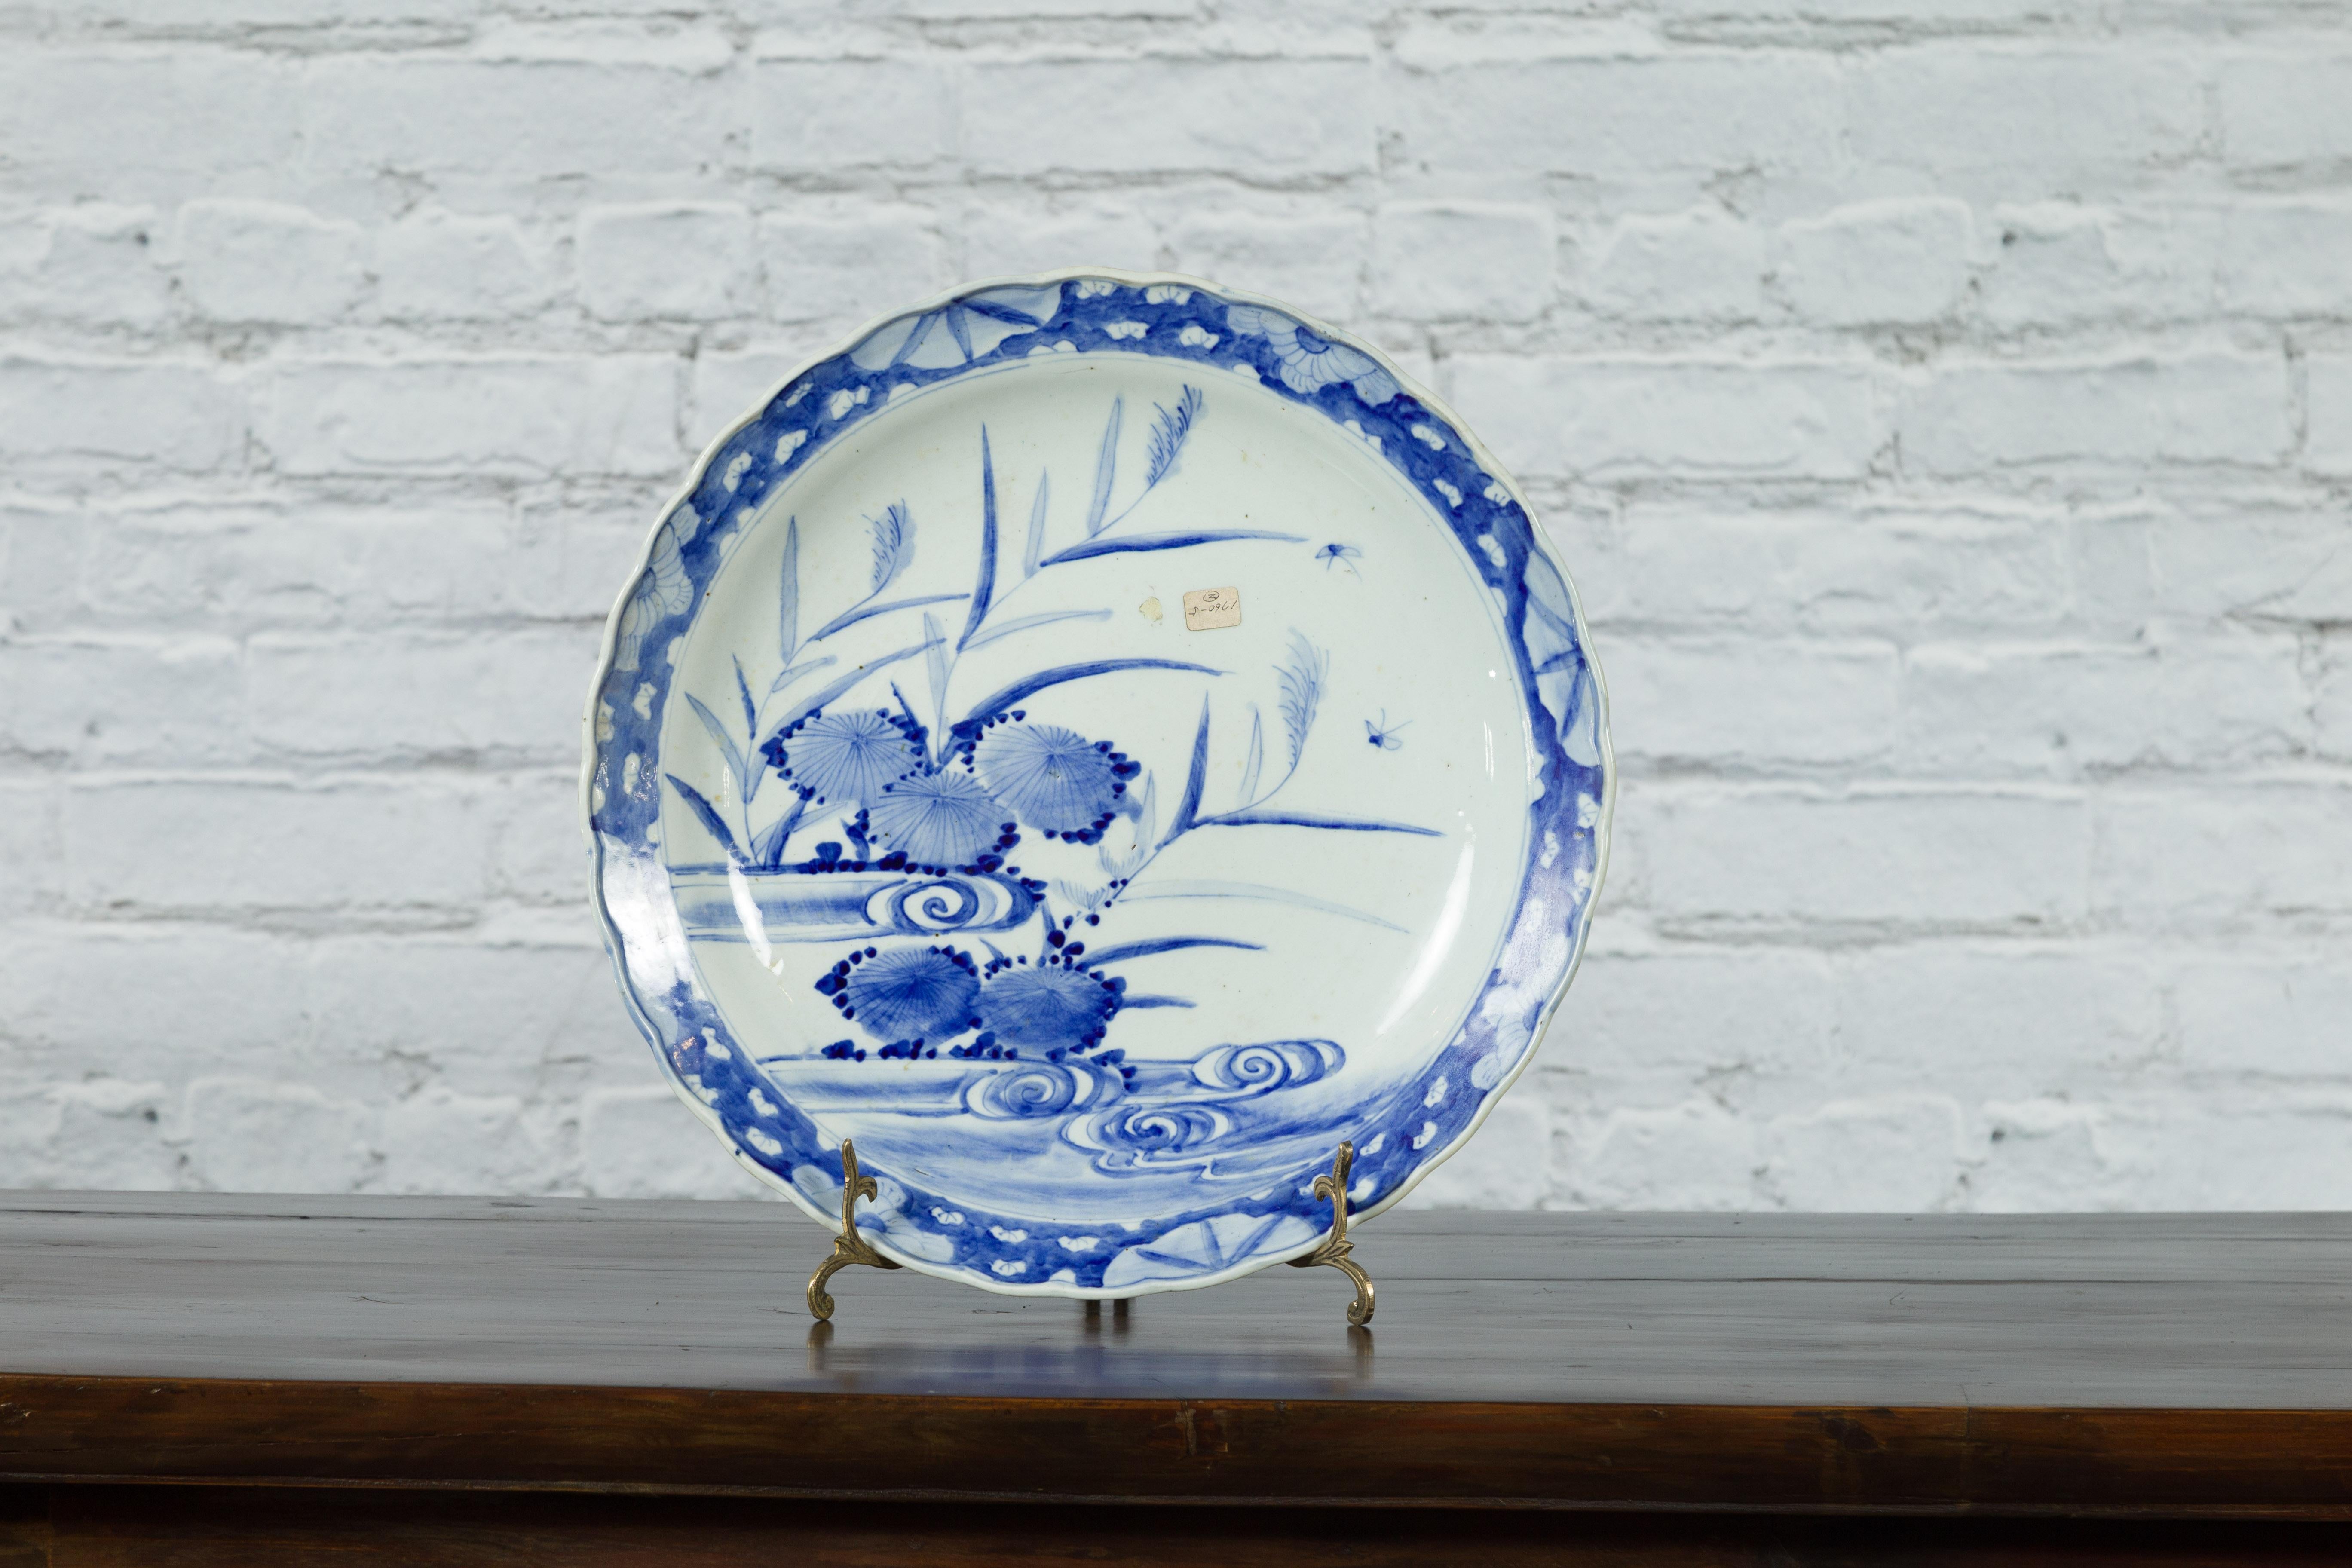 A Japanese Imari porcelain plate from the 19th century, with hand-painted blue and white floral, foliage and butterfly décor. Created in Japan during the 19th century, this Imari porcelain plate features a delicate blue and white décor depicting an